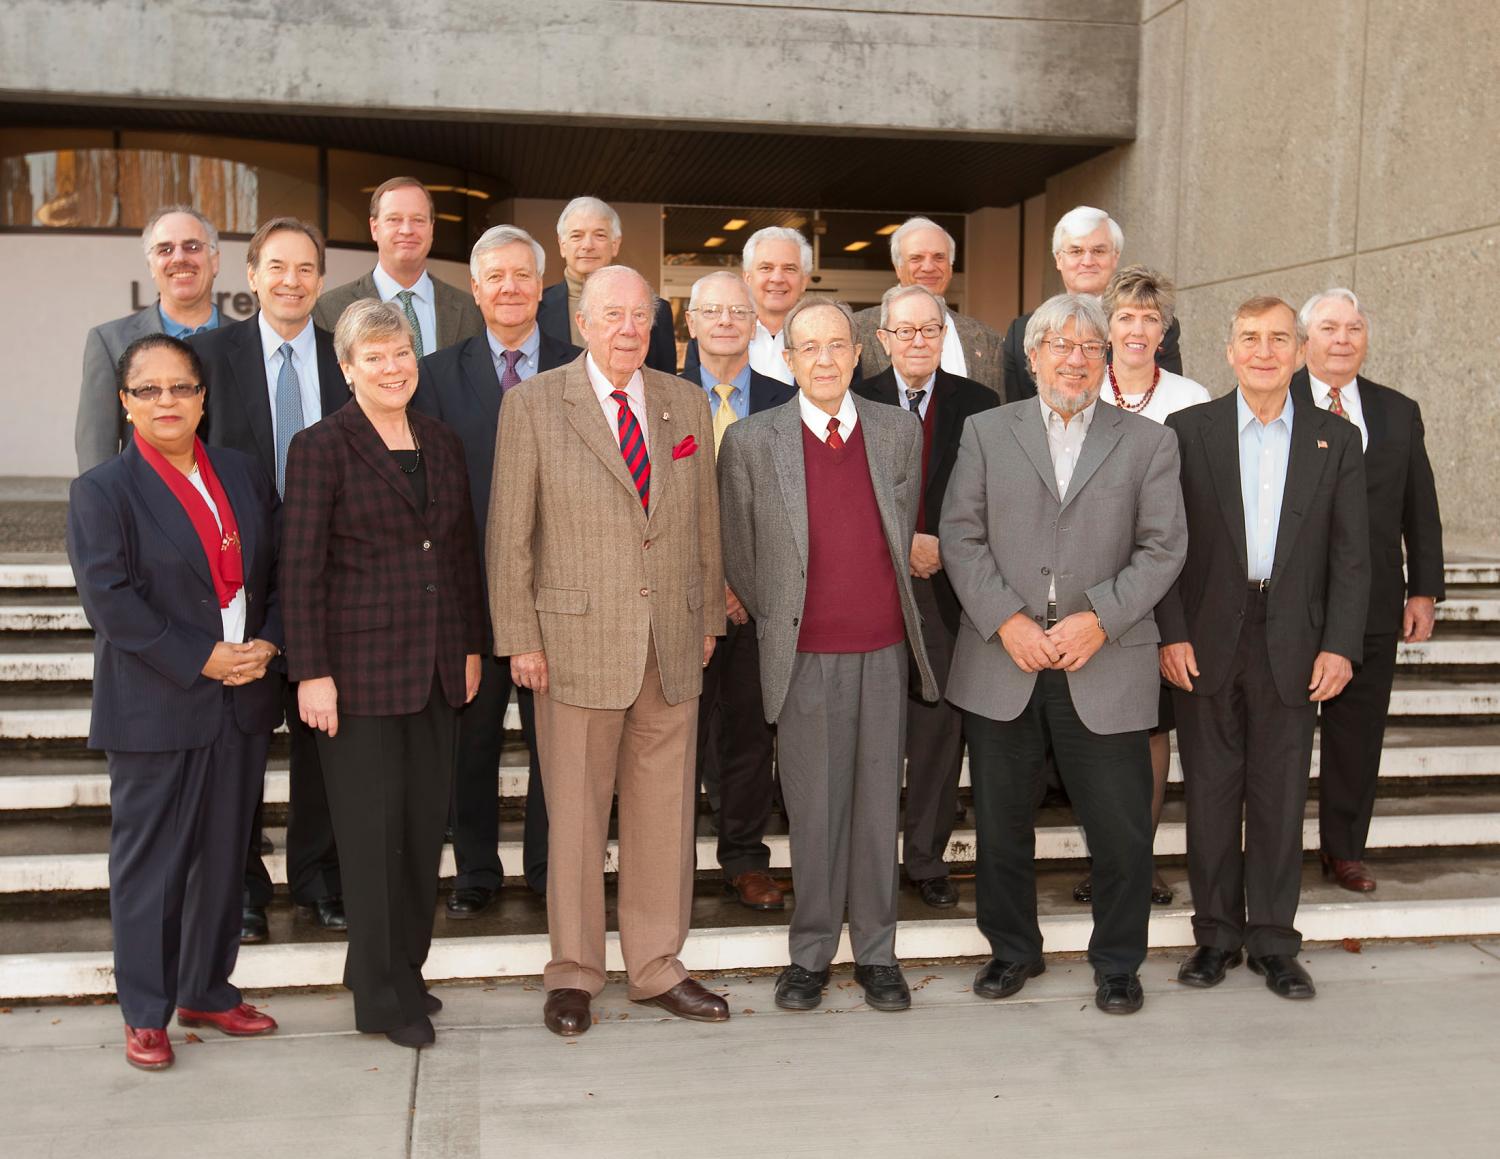 Acting Under Secretary of State for Arms Control and International Security Rose Gottemoeller poses for a photo with the International Security Advisory Board members at the Lawrence Livermore National Laboratory in Livermore, California, on February 8, 2012. Bruce Blair is the furthest to the left in the middle row. Source: U.S. Department of State